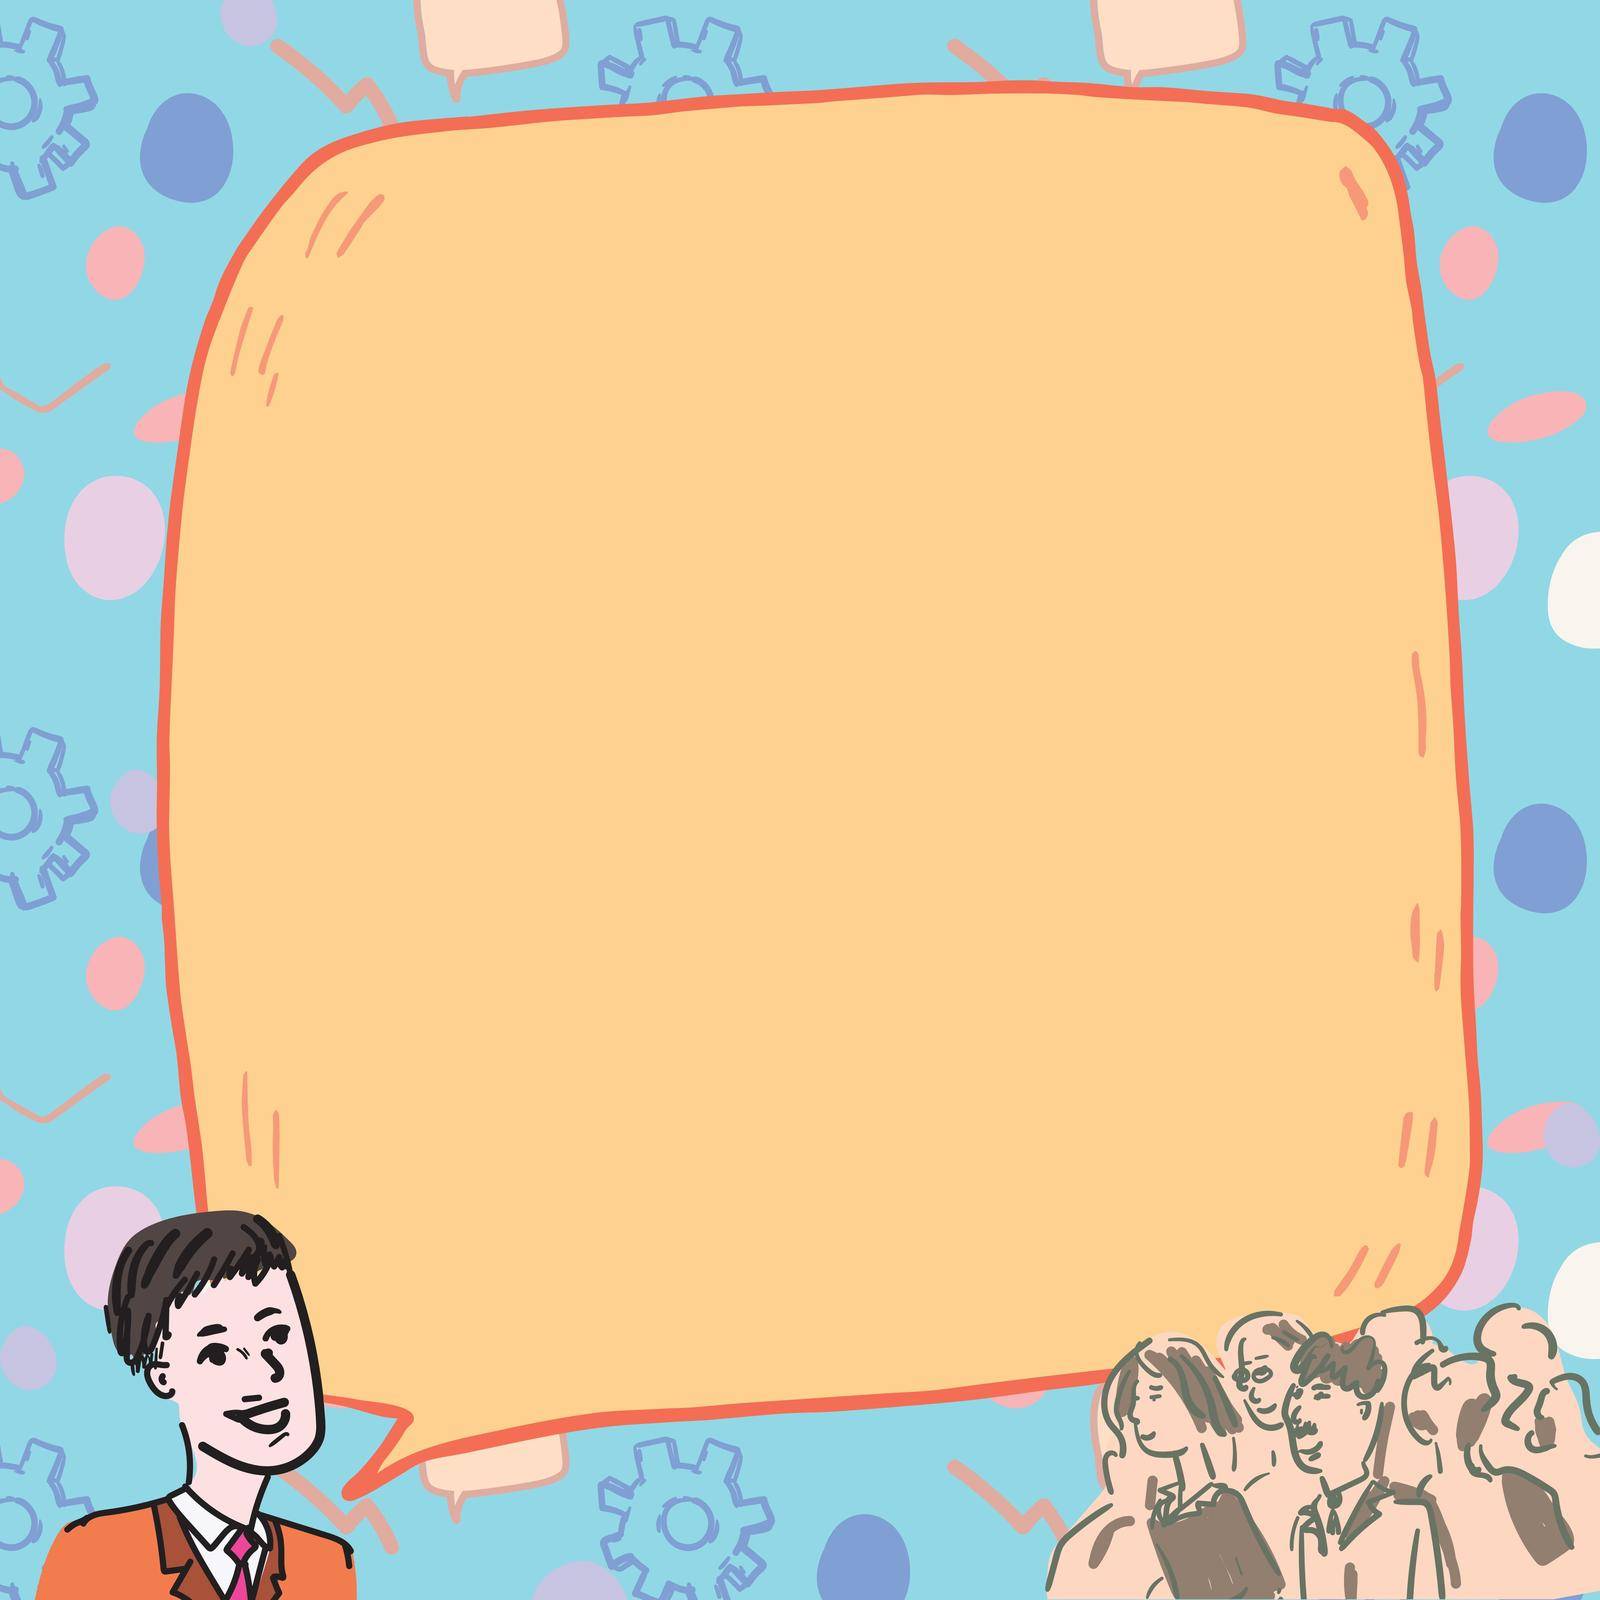 Businessman With Large Speech Bubble Talking To Crowd Presenting New Ideas. School Teacher With Plain Bubble Having Lecture To Students Recent Studies. by nialowwa